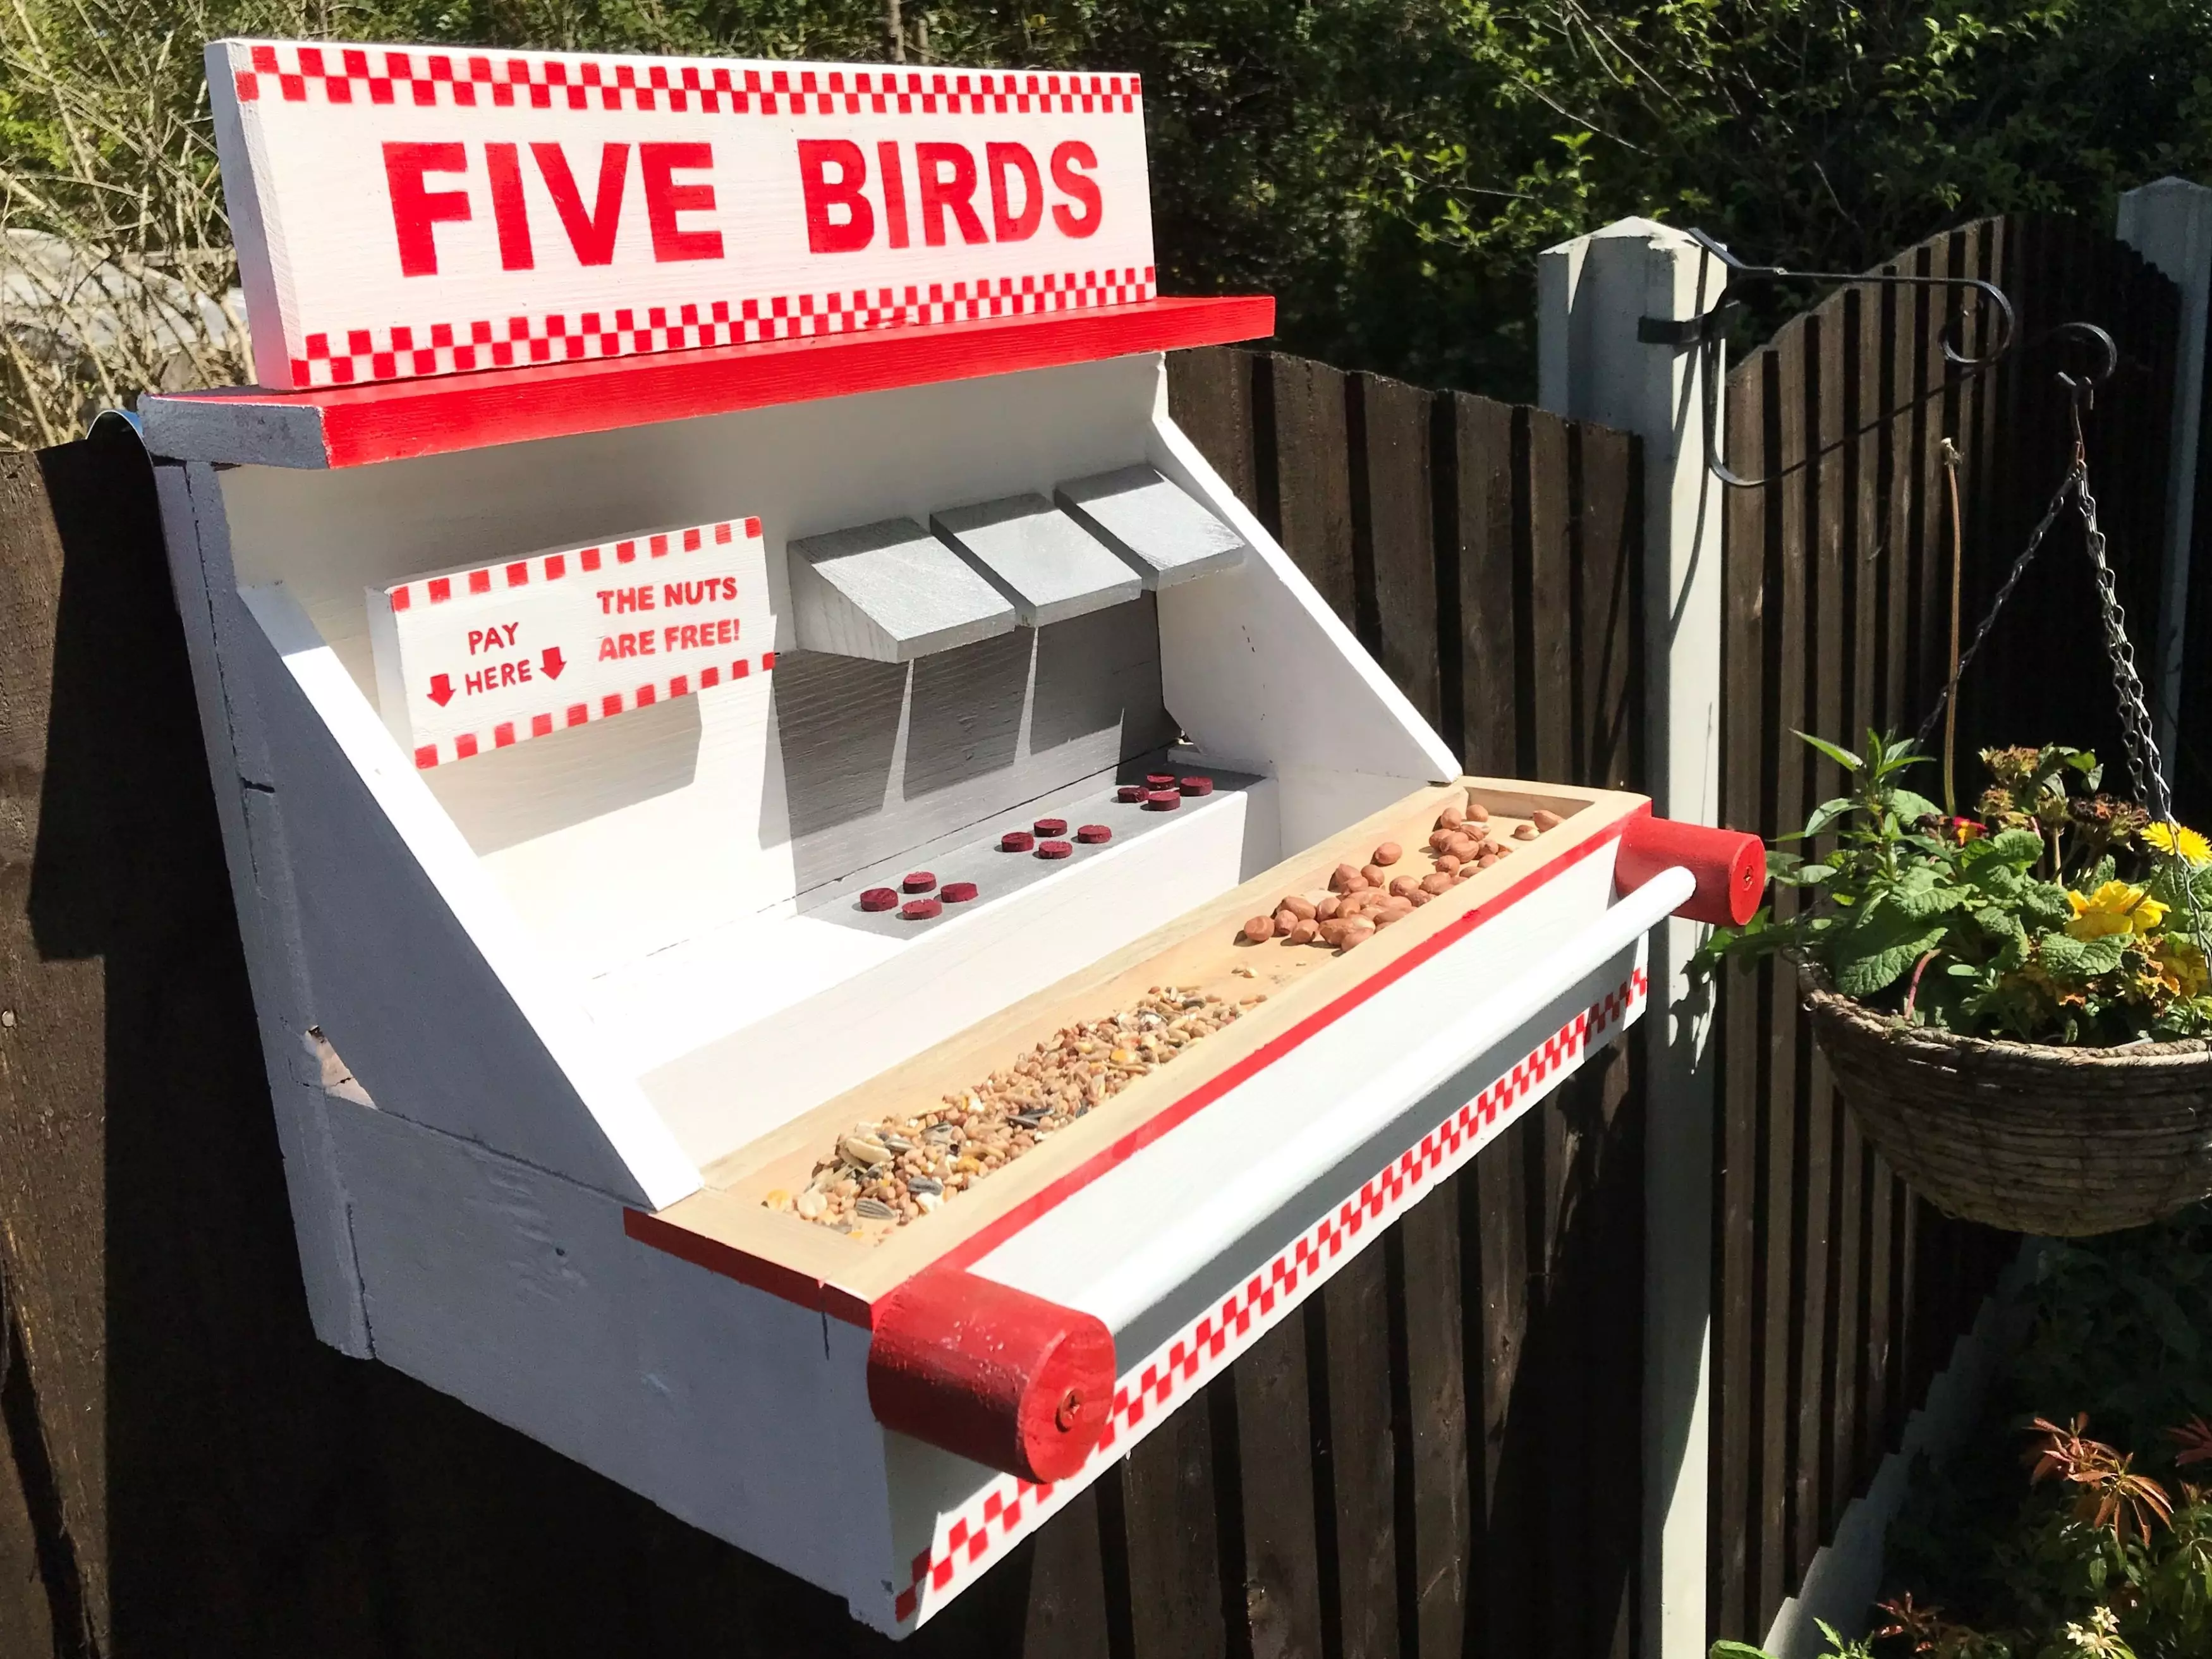 The Five Birds restaurant is now open for business.